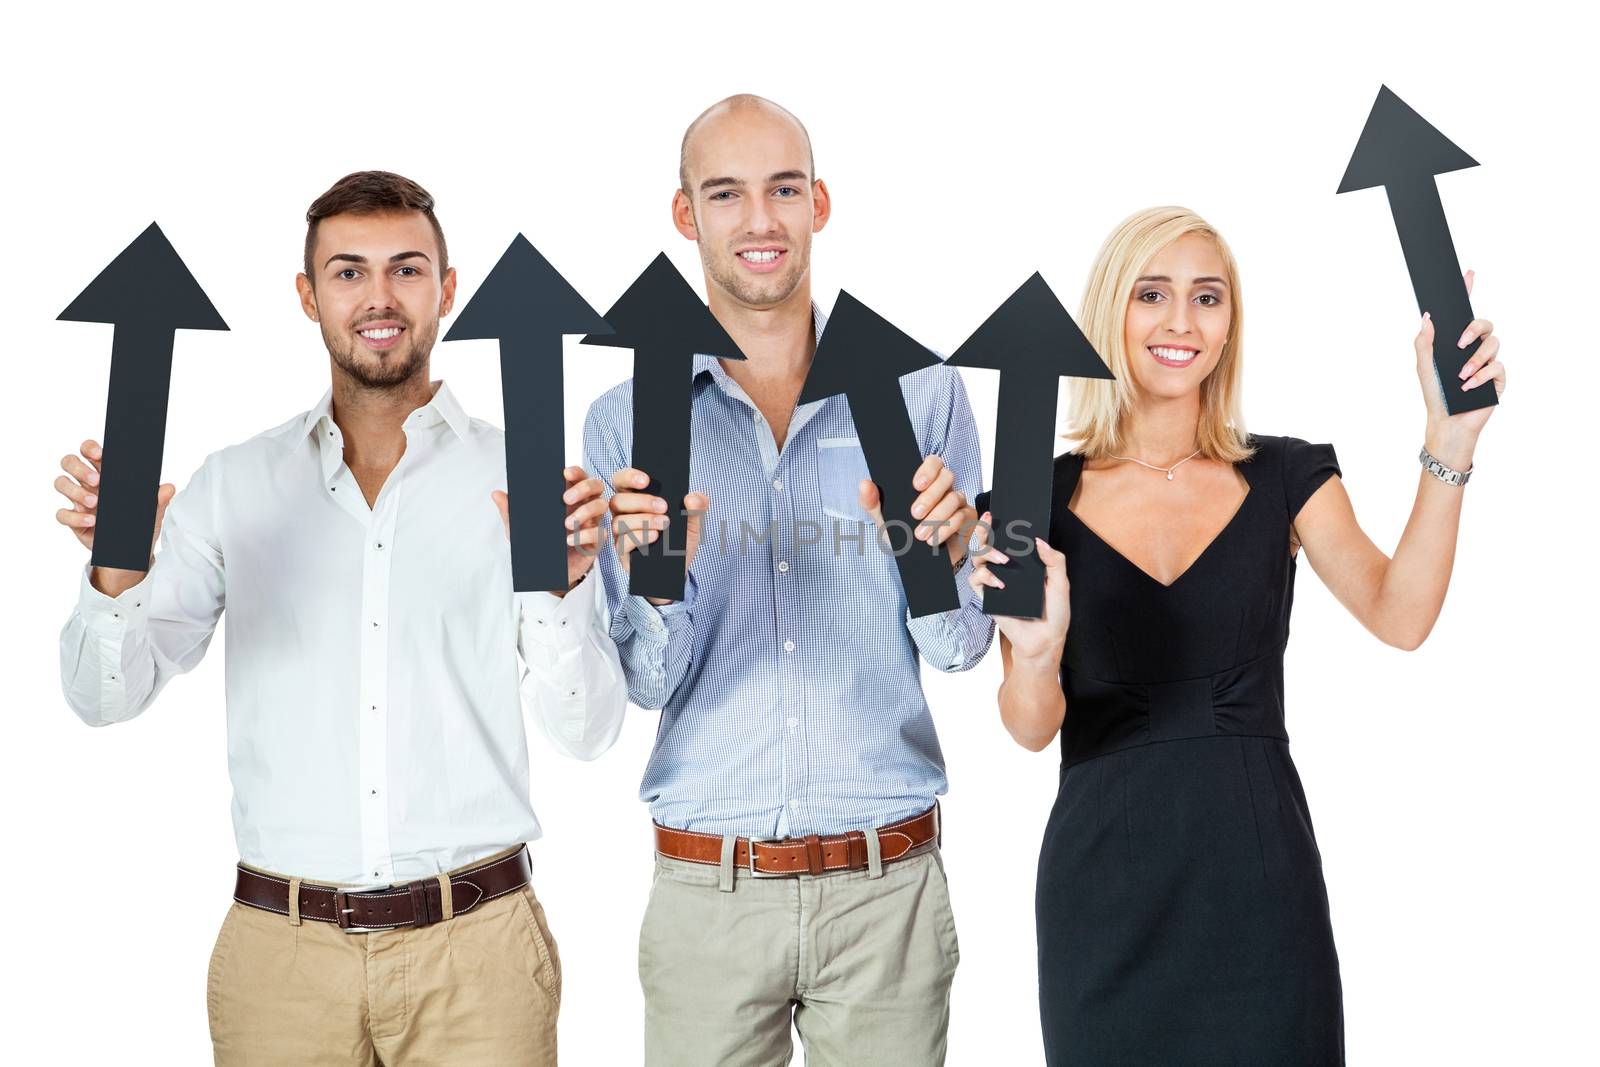 happy people showing up black arrows business team advertising isolated